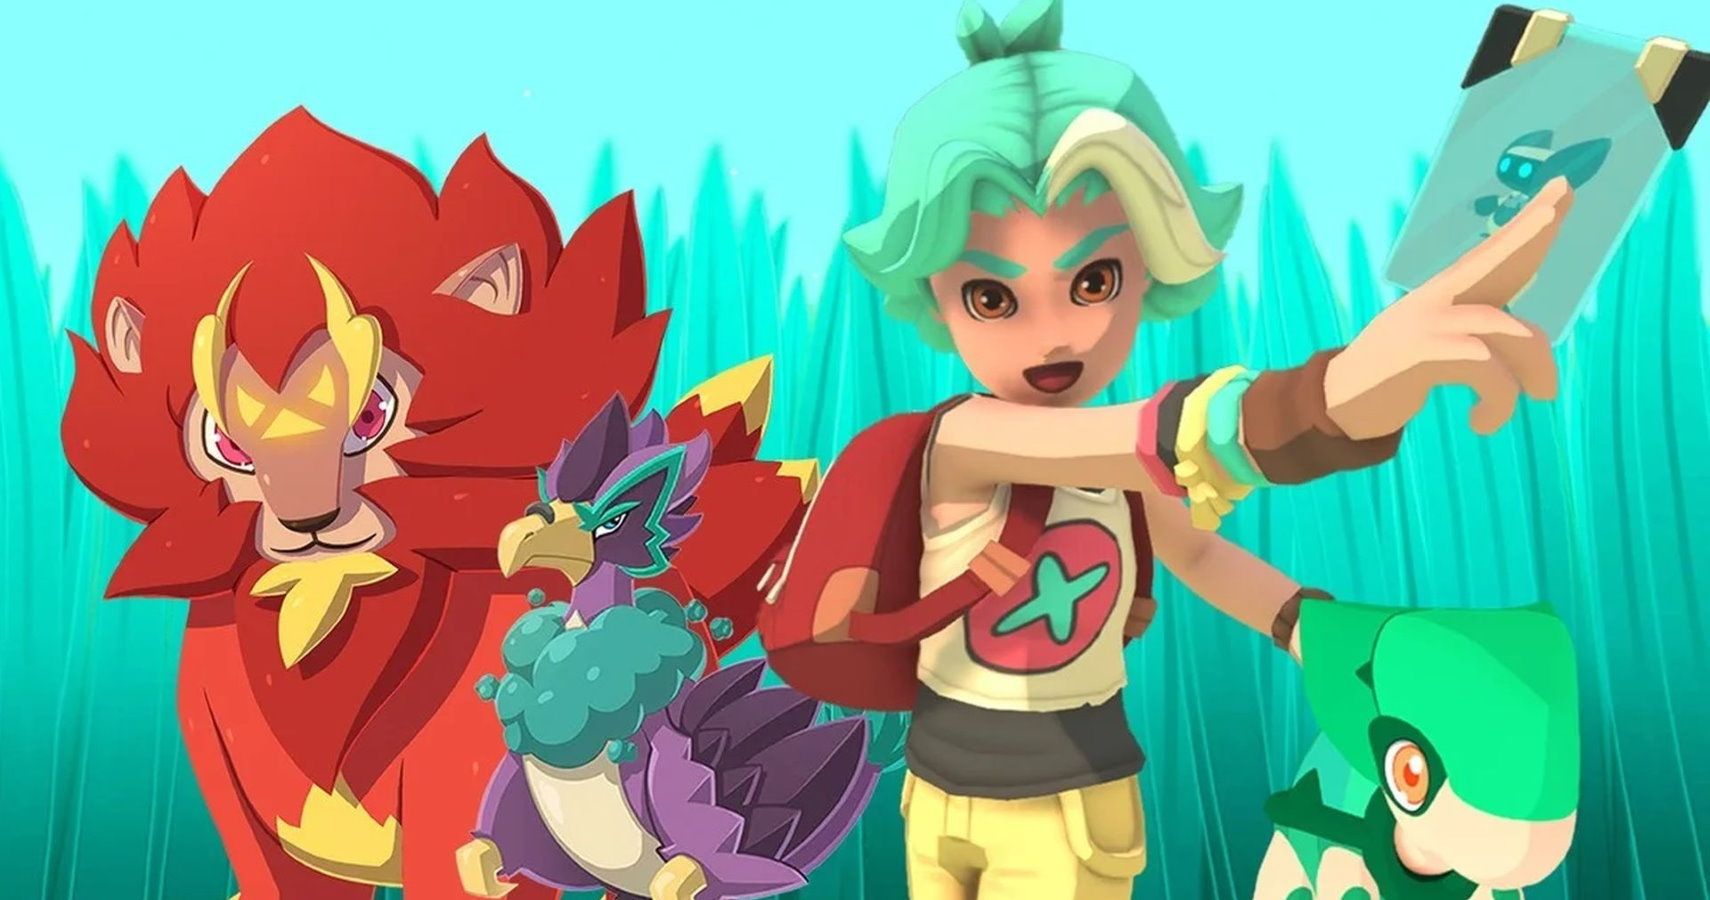 Temtem Is Going To Eat Nintendo’s Lunch By Beating Them To Making A Pokemon MMO